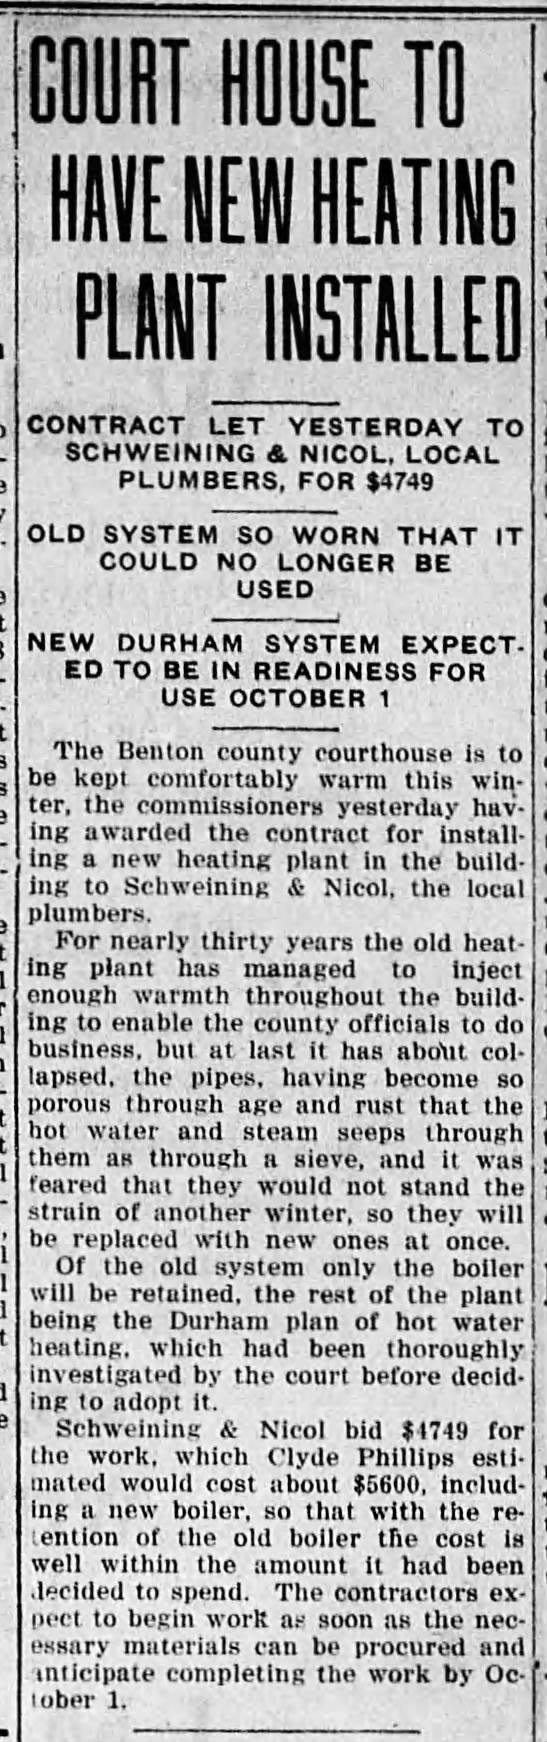 Court House to Have New Heating Plant Installed (Benton County, Oregon)